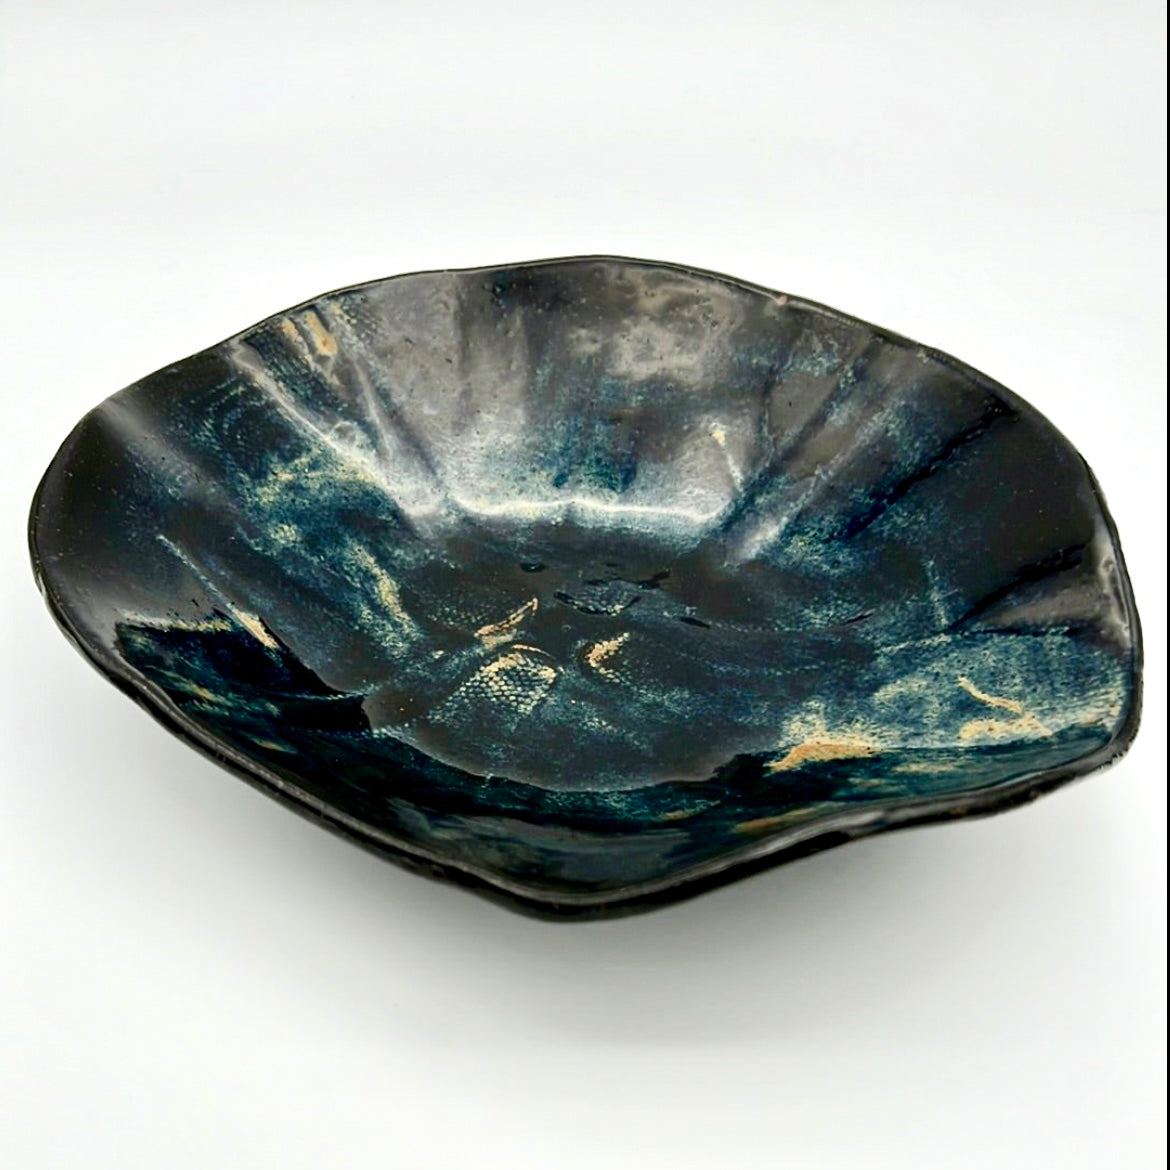 Decorative Accent Serving Dish | ROCK HOME Collection | 10” long x 8.5” wide x 2.5” tall